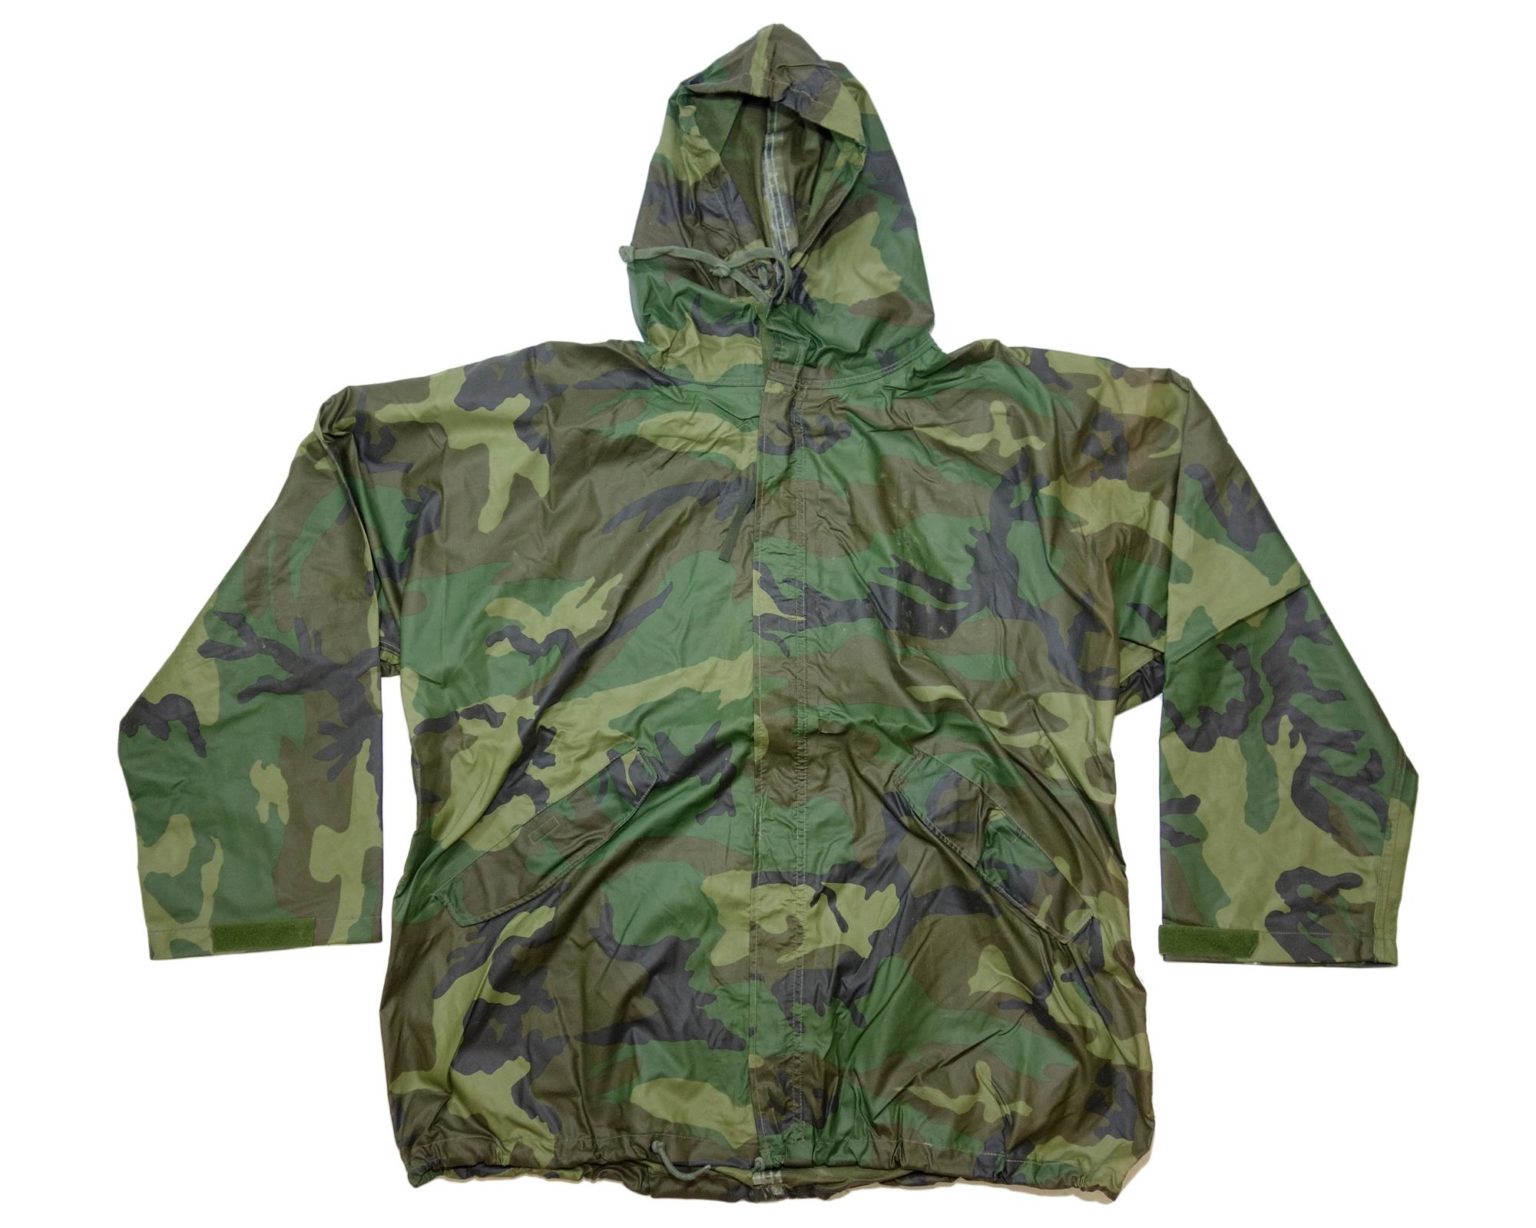 US army military issue woodland camo wet weather parka overcoat